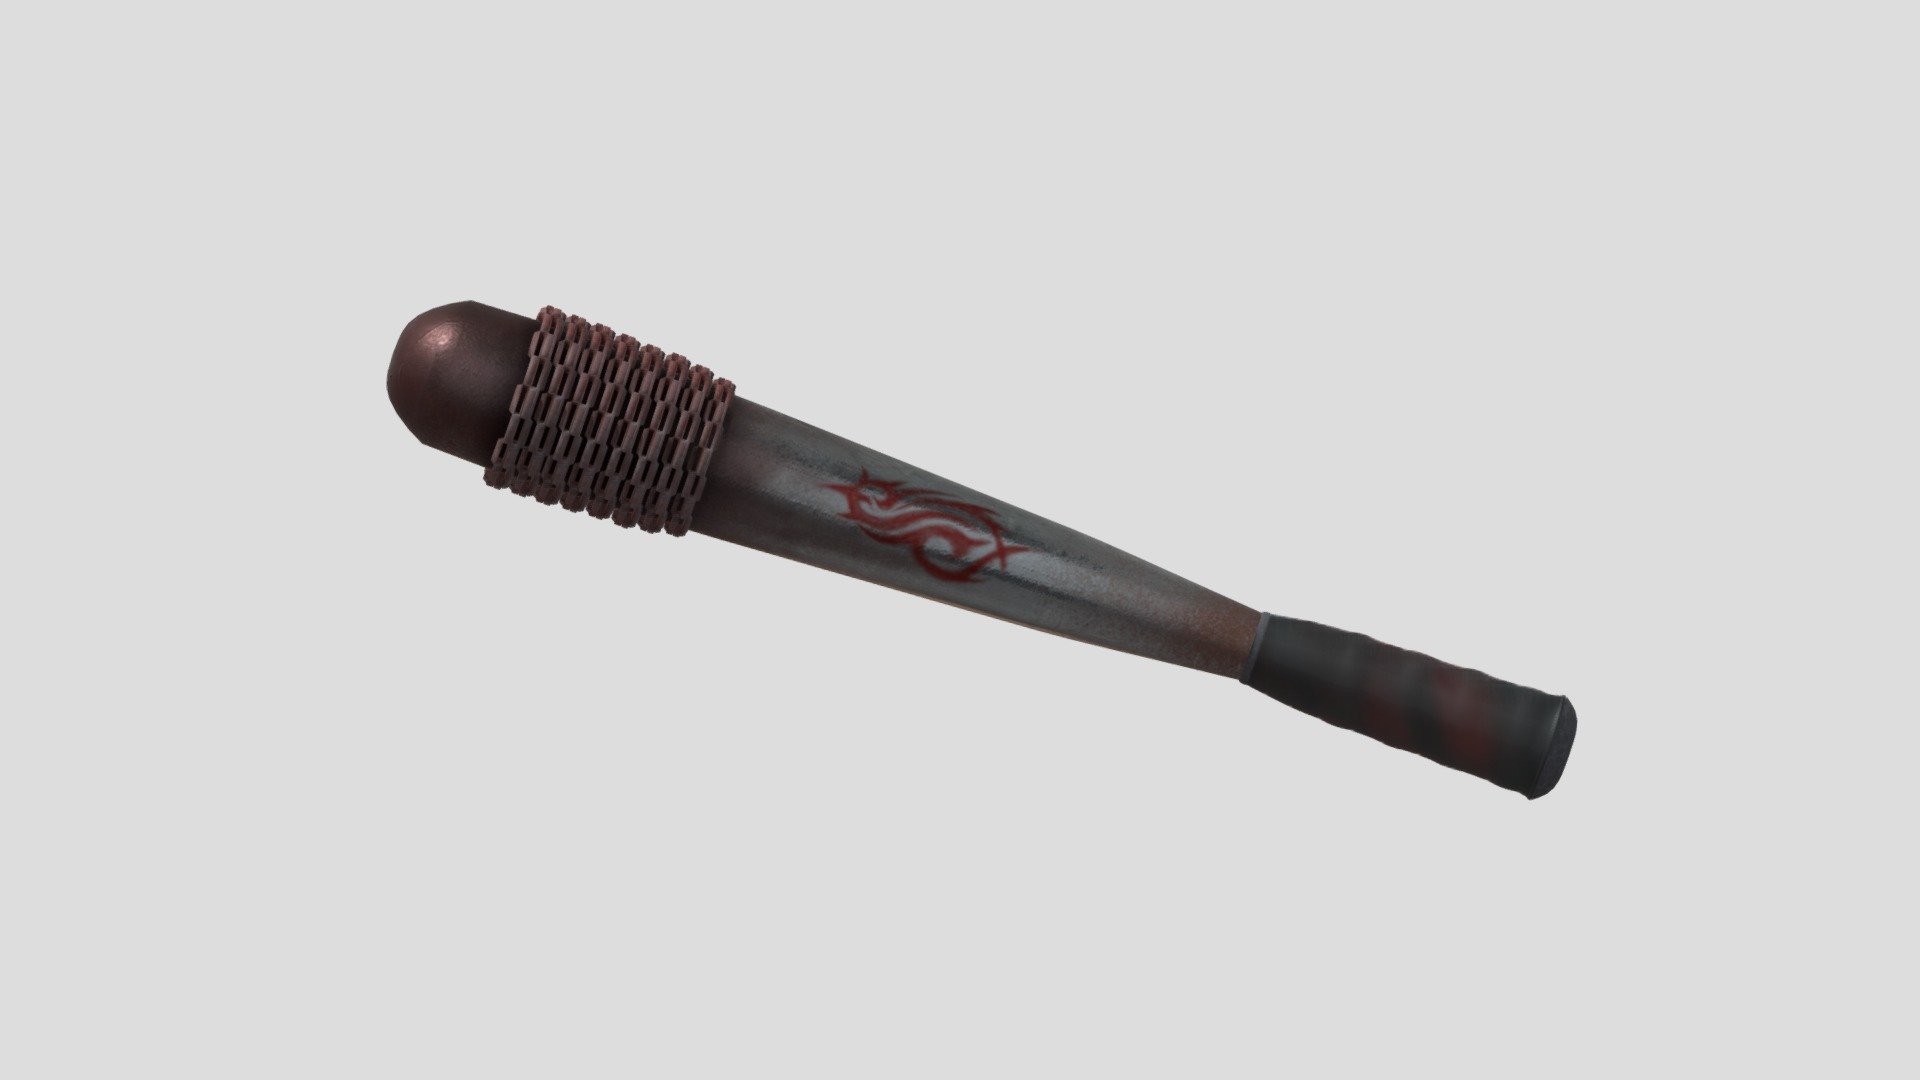 Steel bat with chains and Slipknot logo on it.

Textures made with Substance Painter 3d model